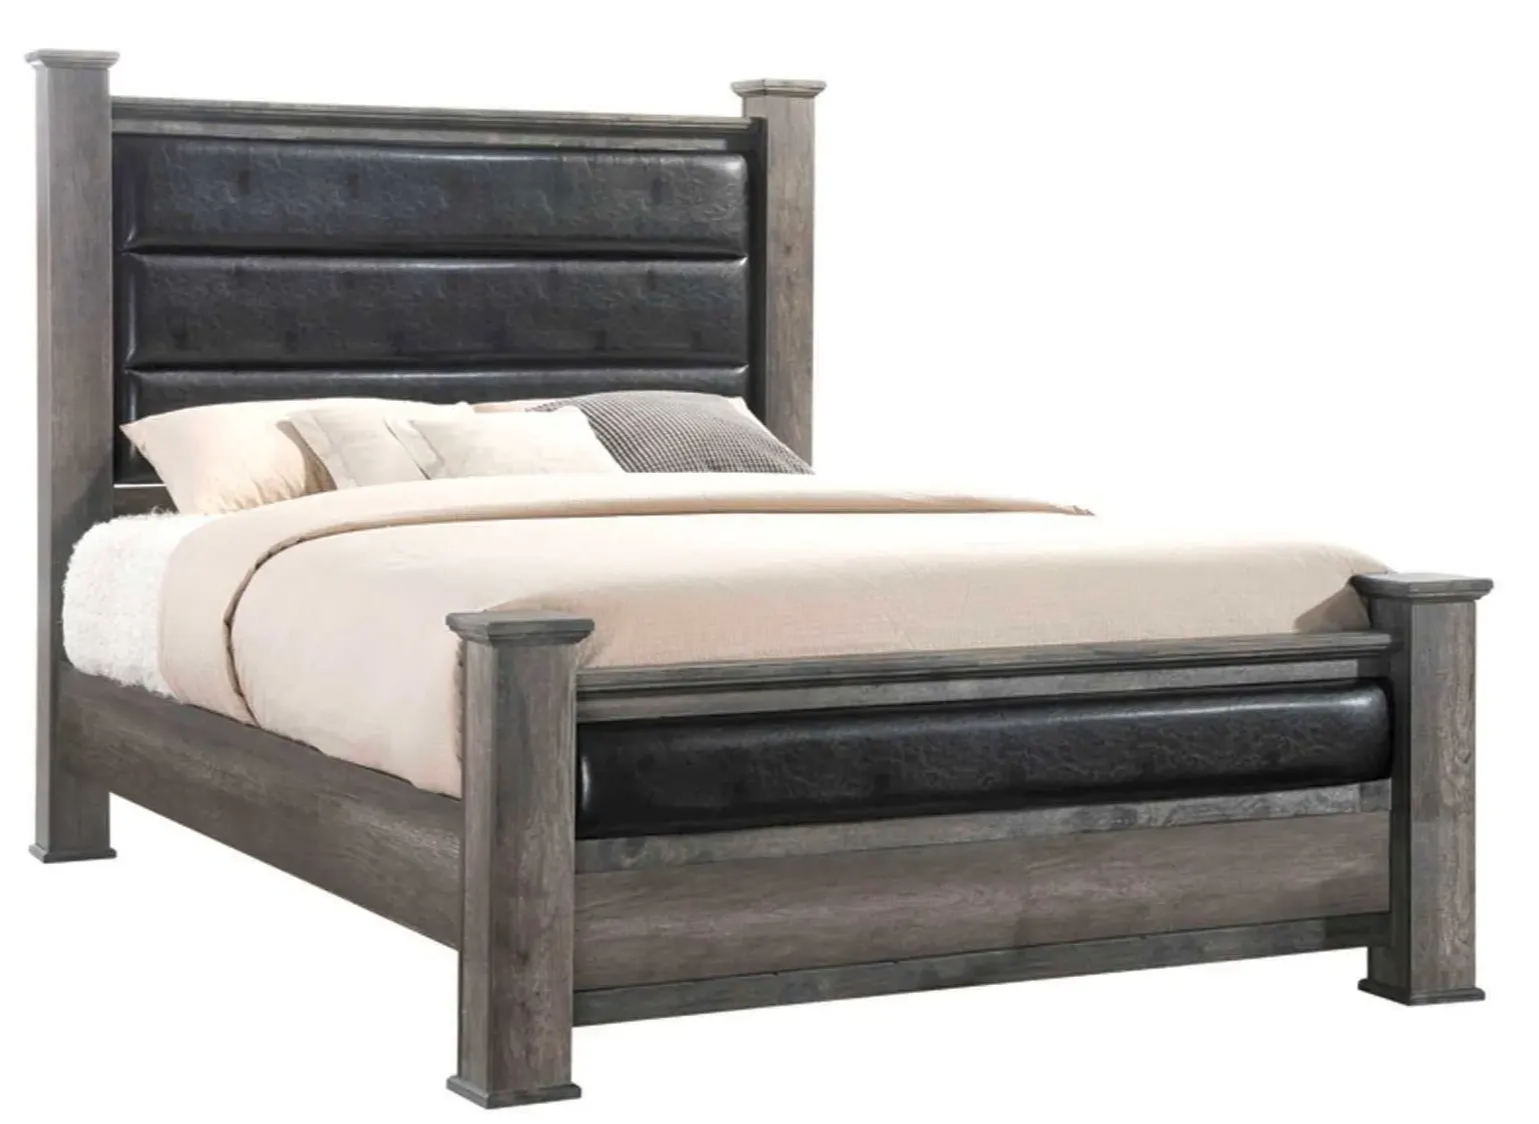 The Nathan Bed Set Review